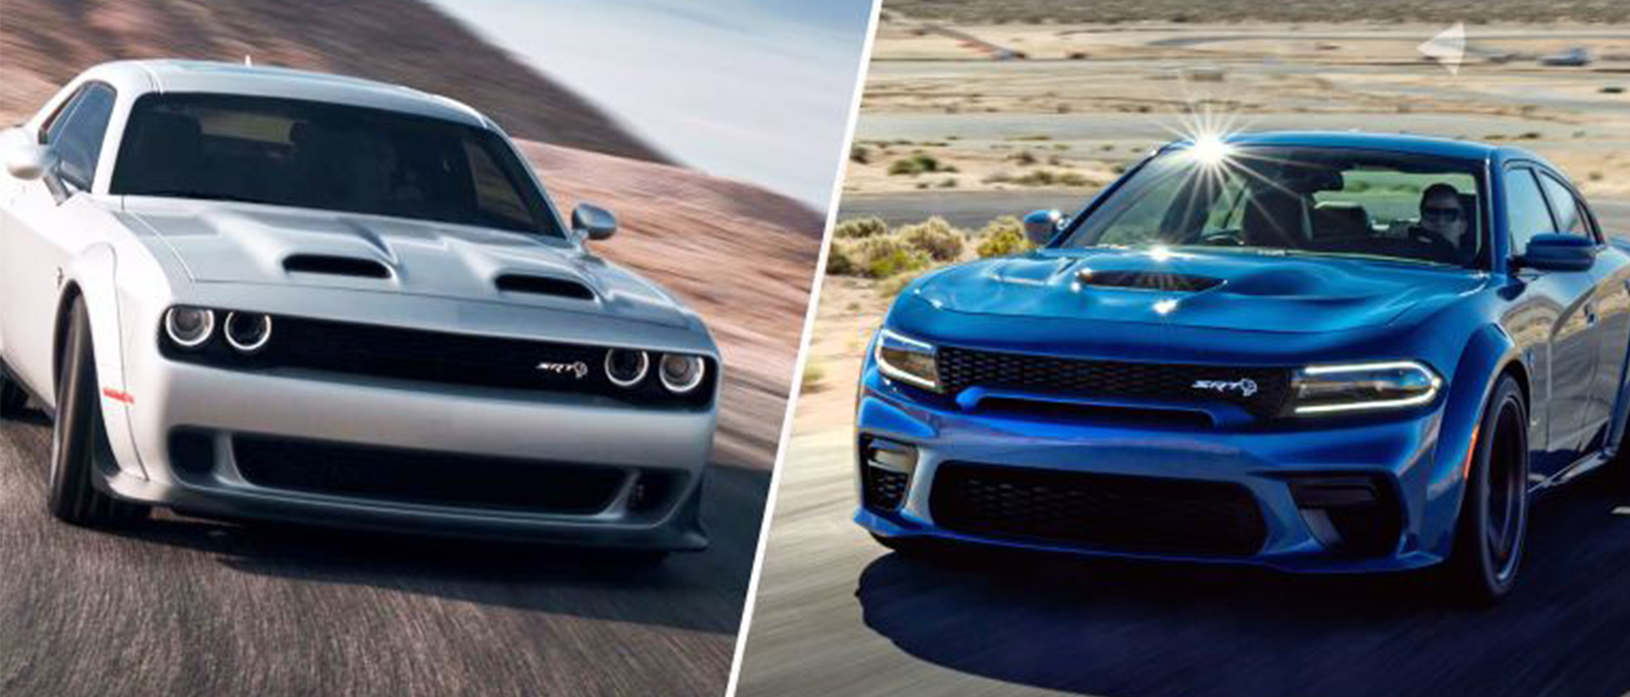 Dodge Charger and Challenger: Options Galore